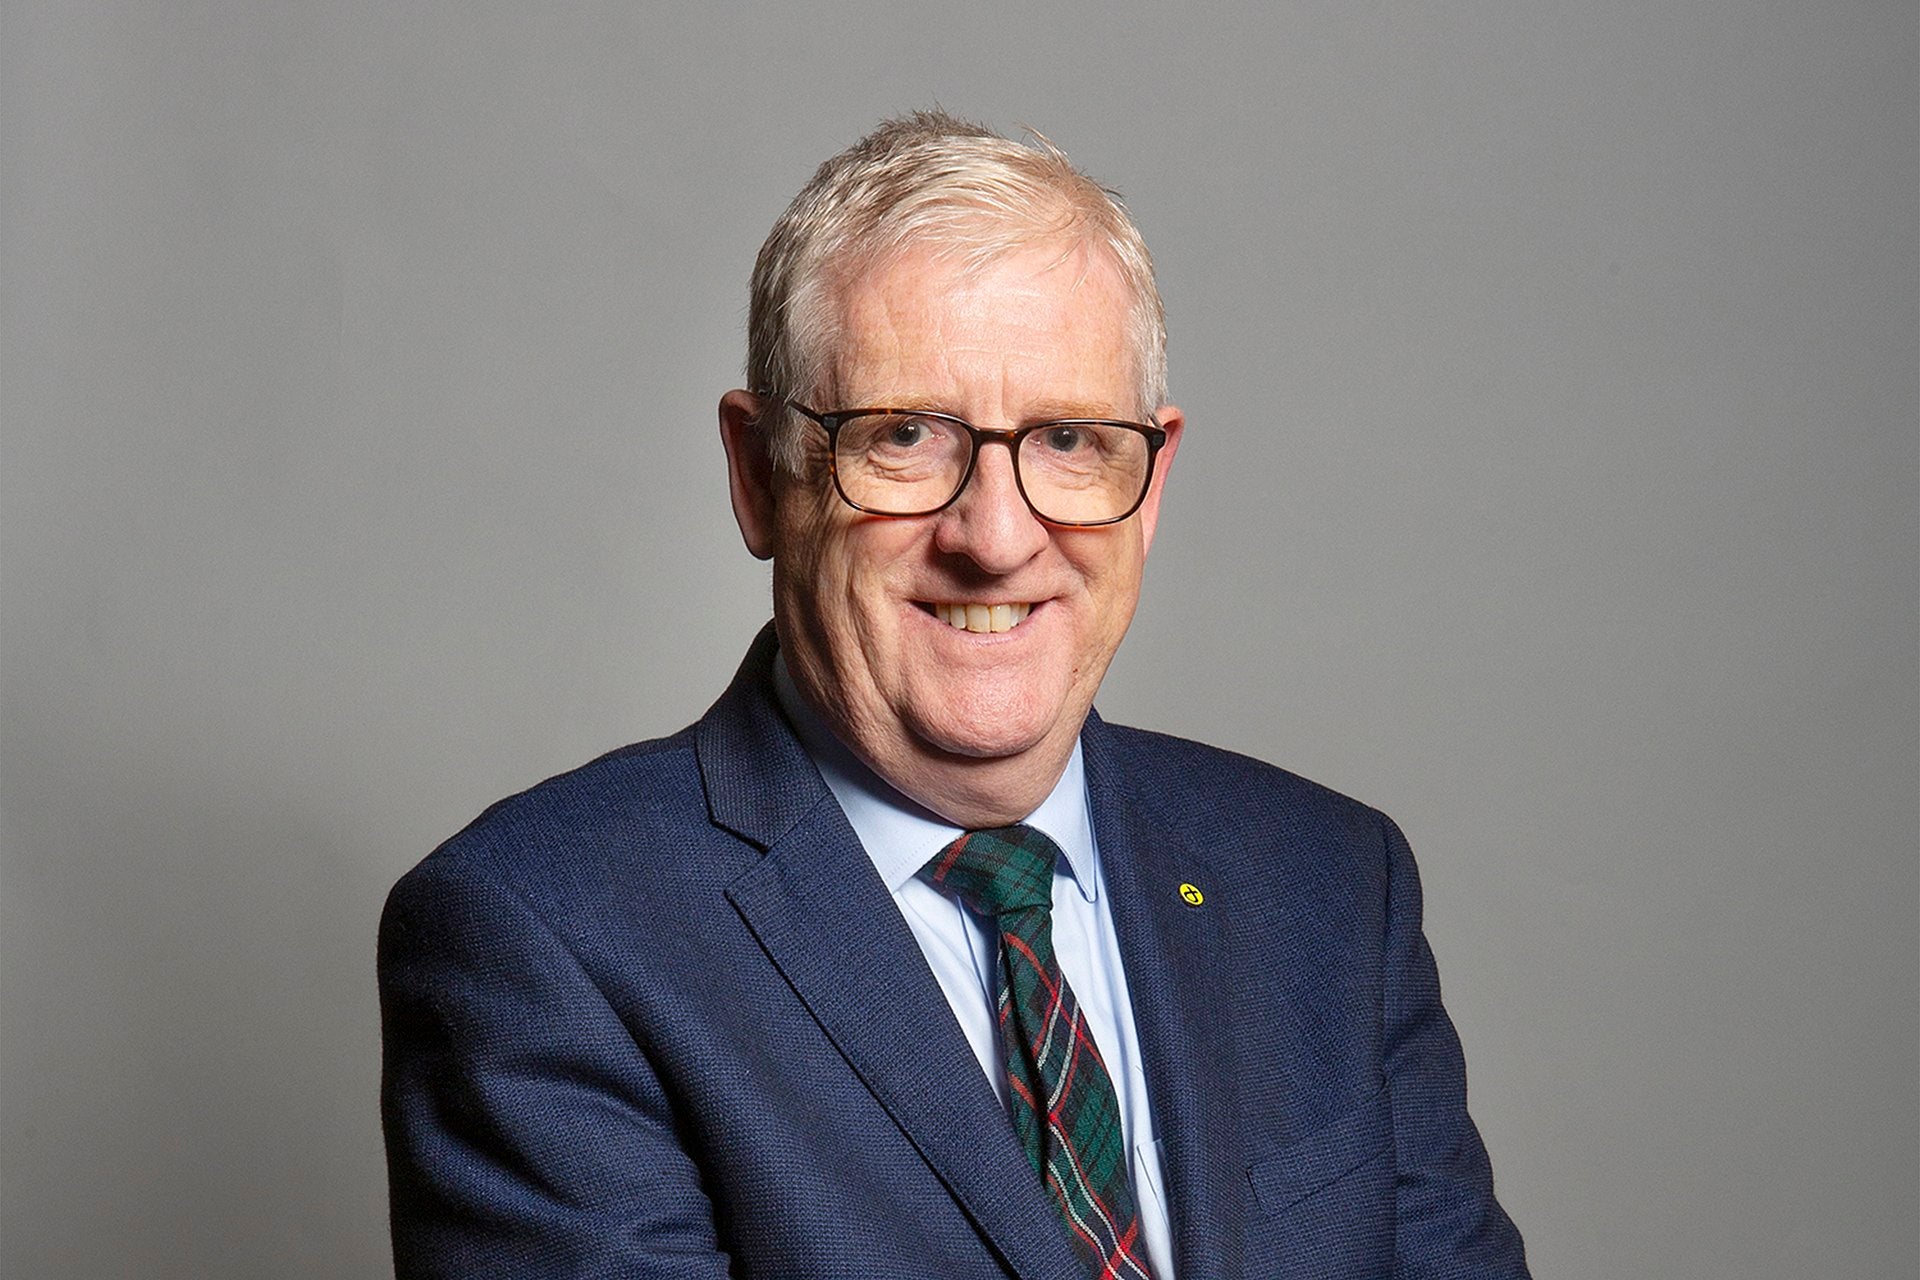 Douglas Chapman resigned from his role as SNP treasurer in May 2021